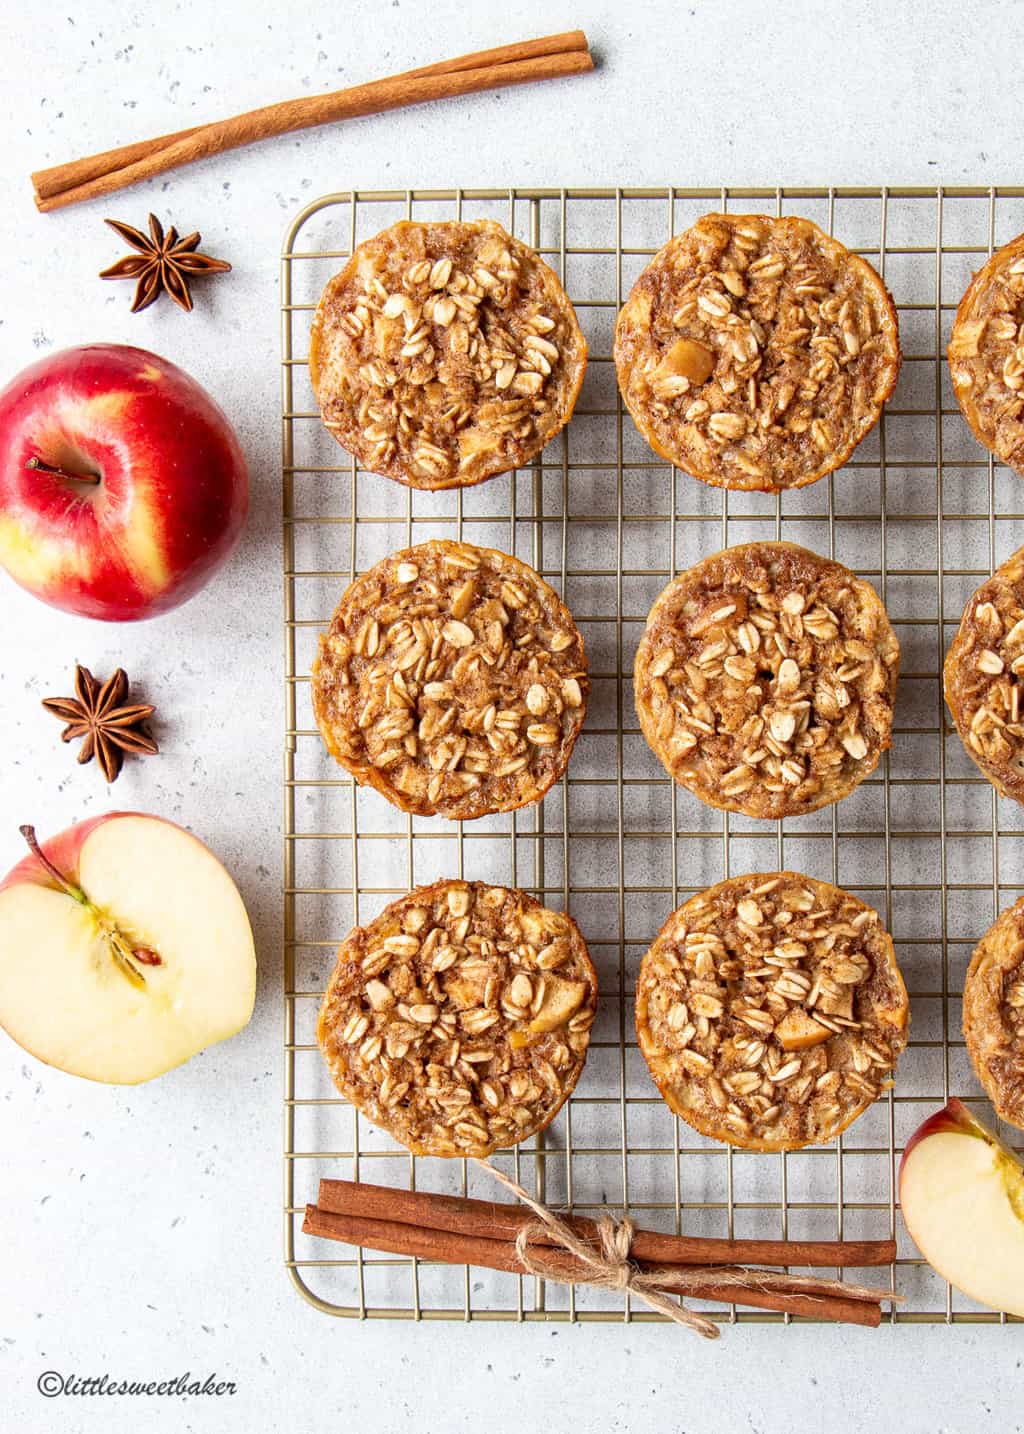 Baked apple oatmeal cups on a cooling rack with apples and cinnamon sticks.